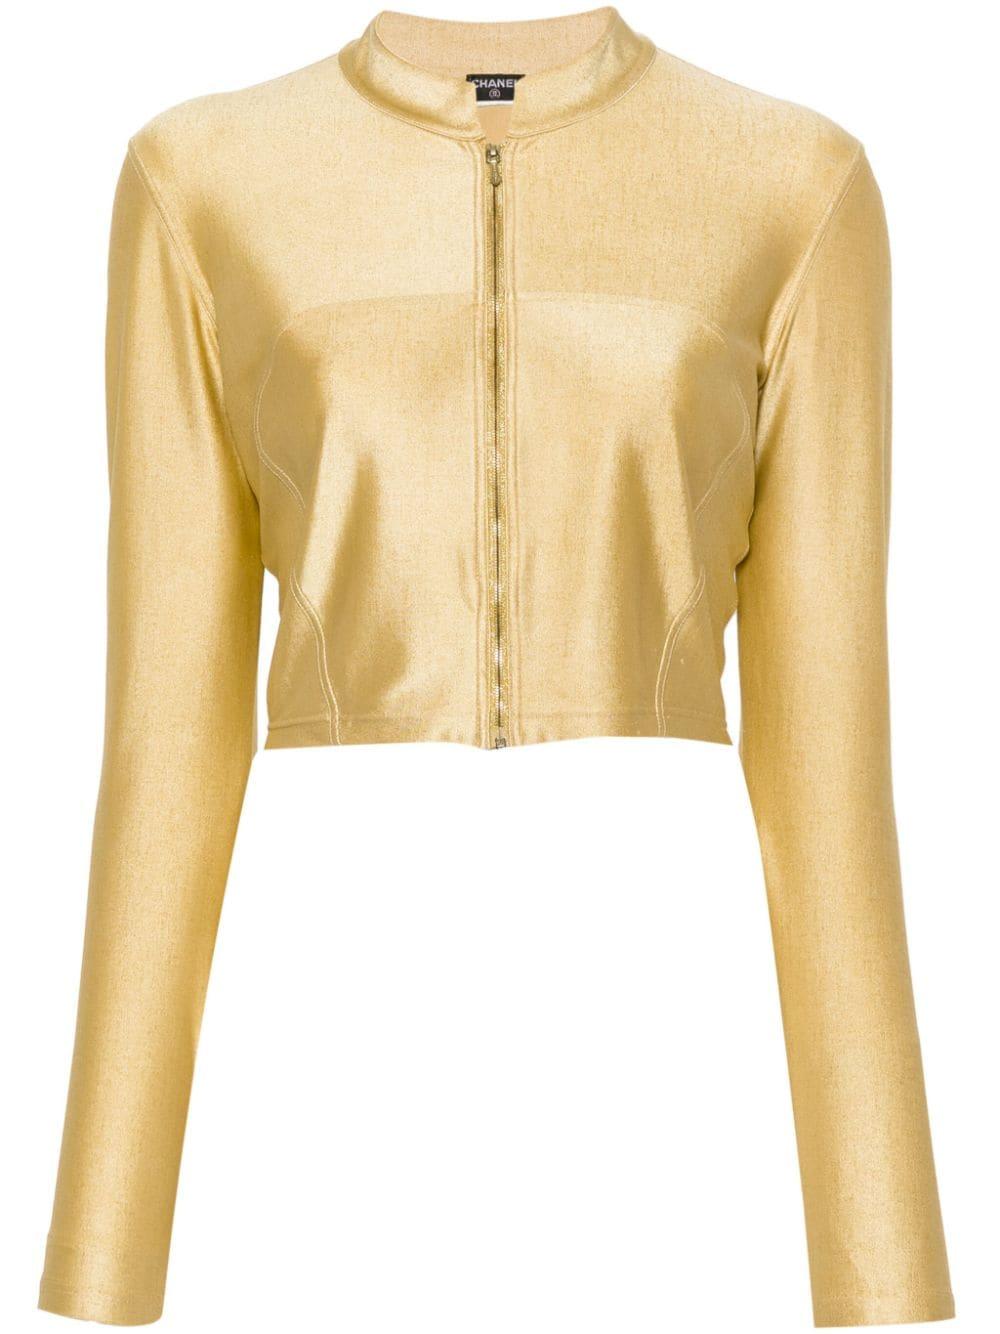  Chanel Gold-Tone Metallic Cropped Jacket For Sale 2